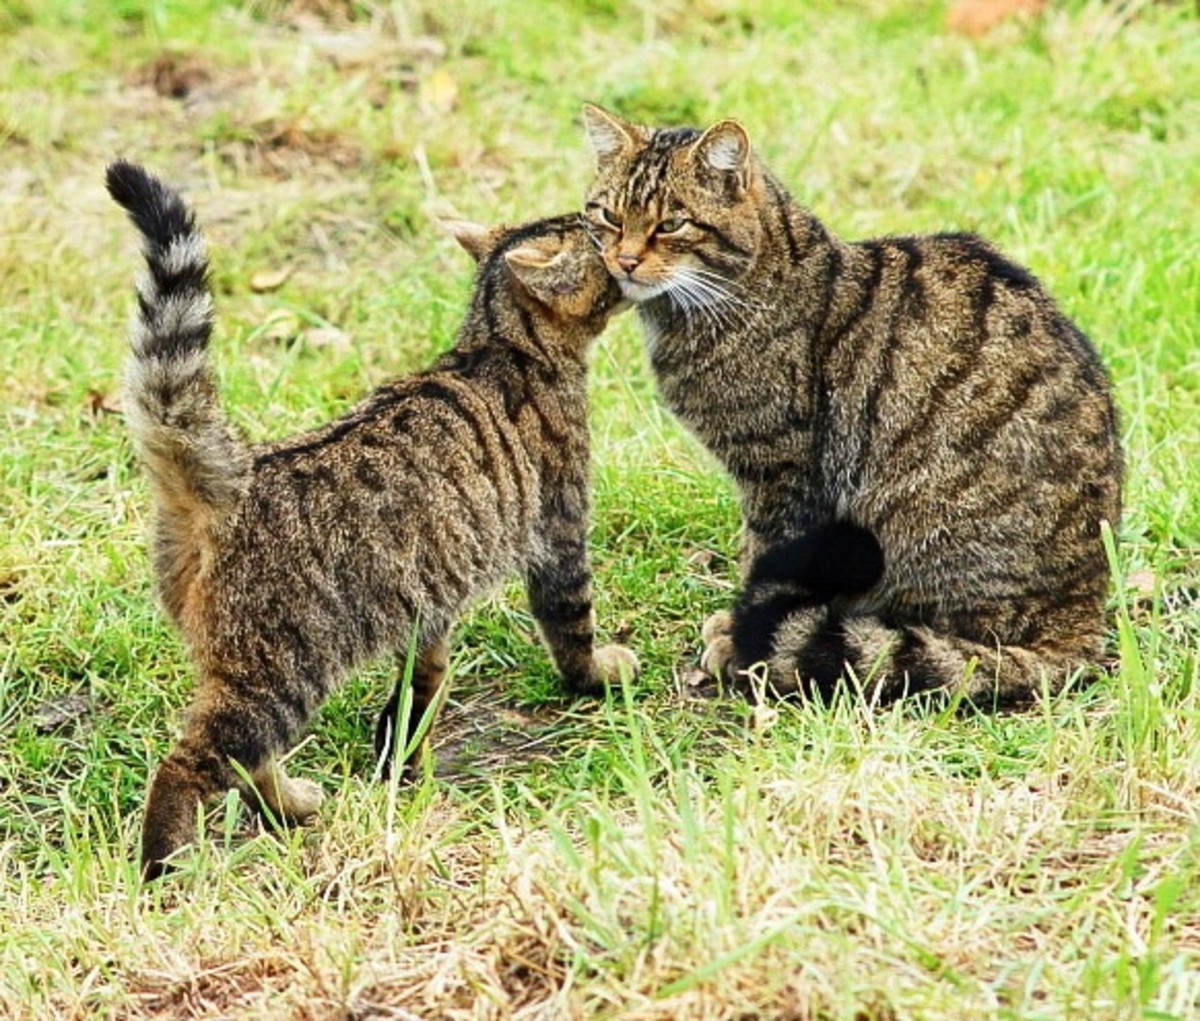 Kendra is a Scottish wildcat (or more likely a hybrid due to the spots on her side) at the British Wildlife Centre in Surrey, England. In this photo she is with one of her kittens.